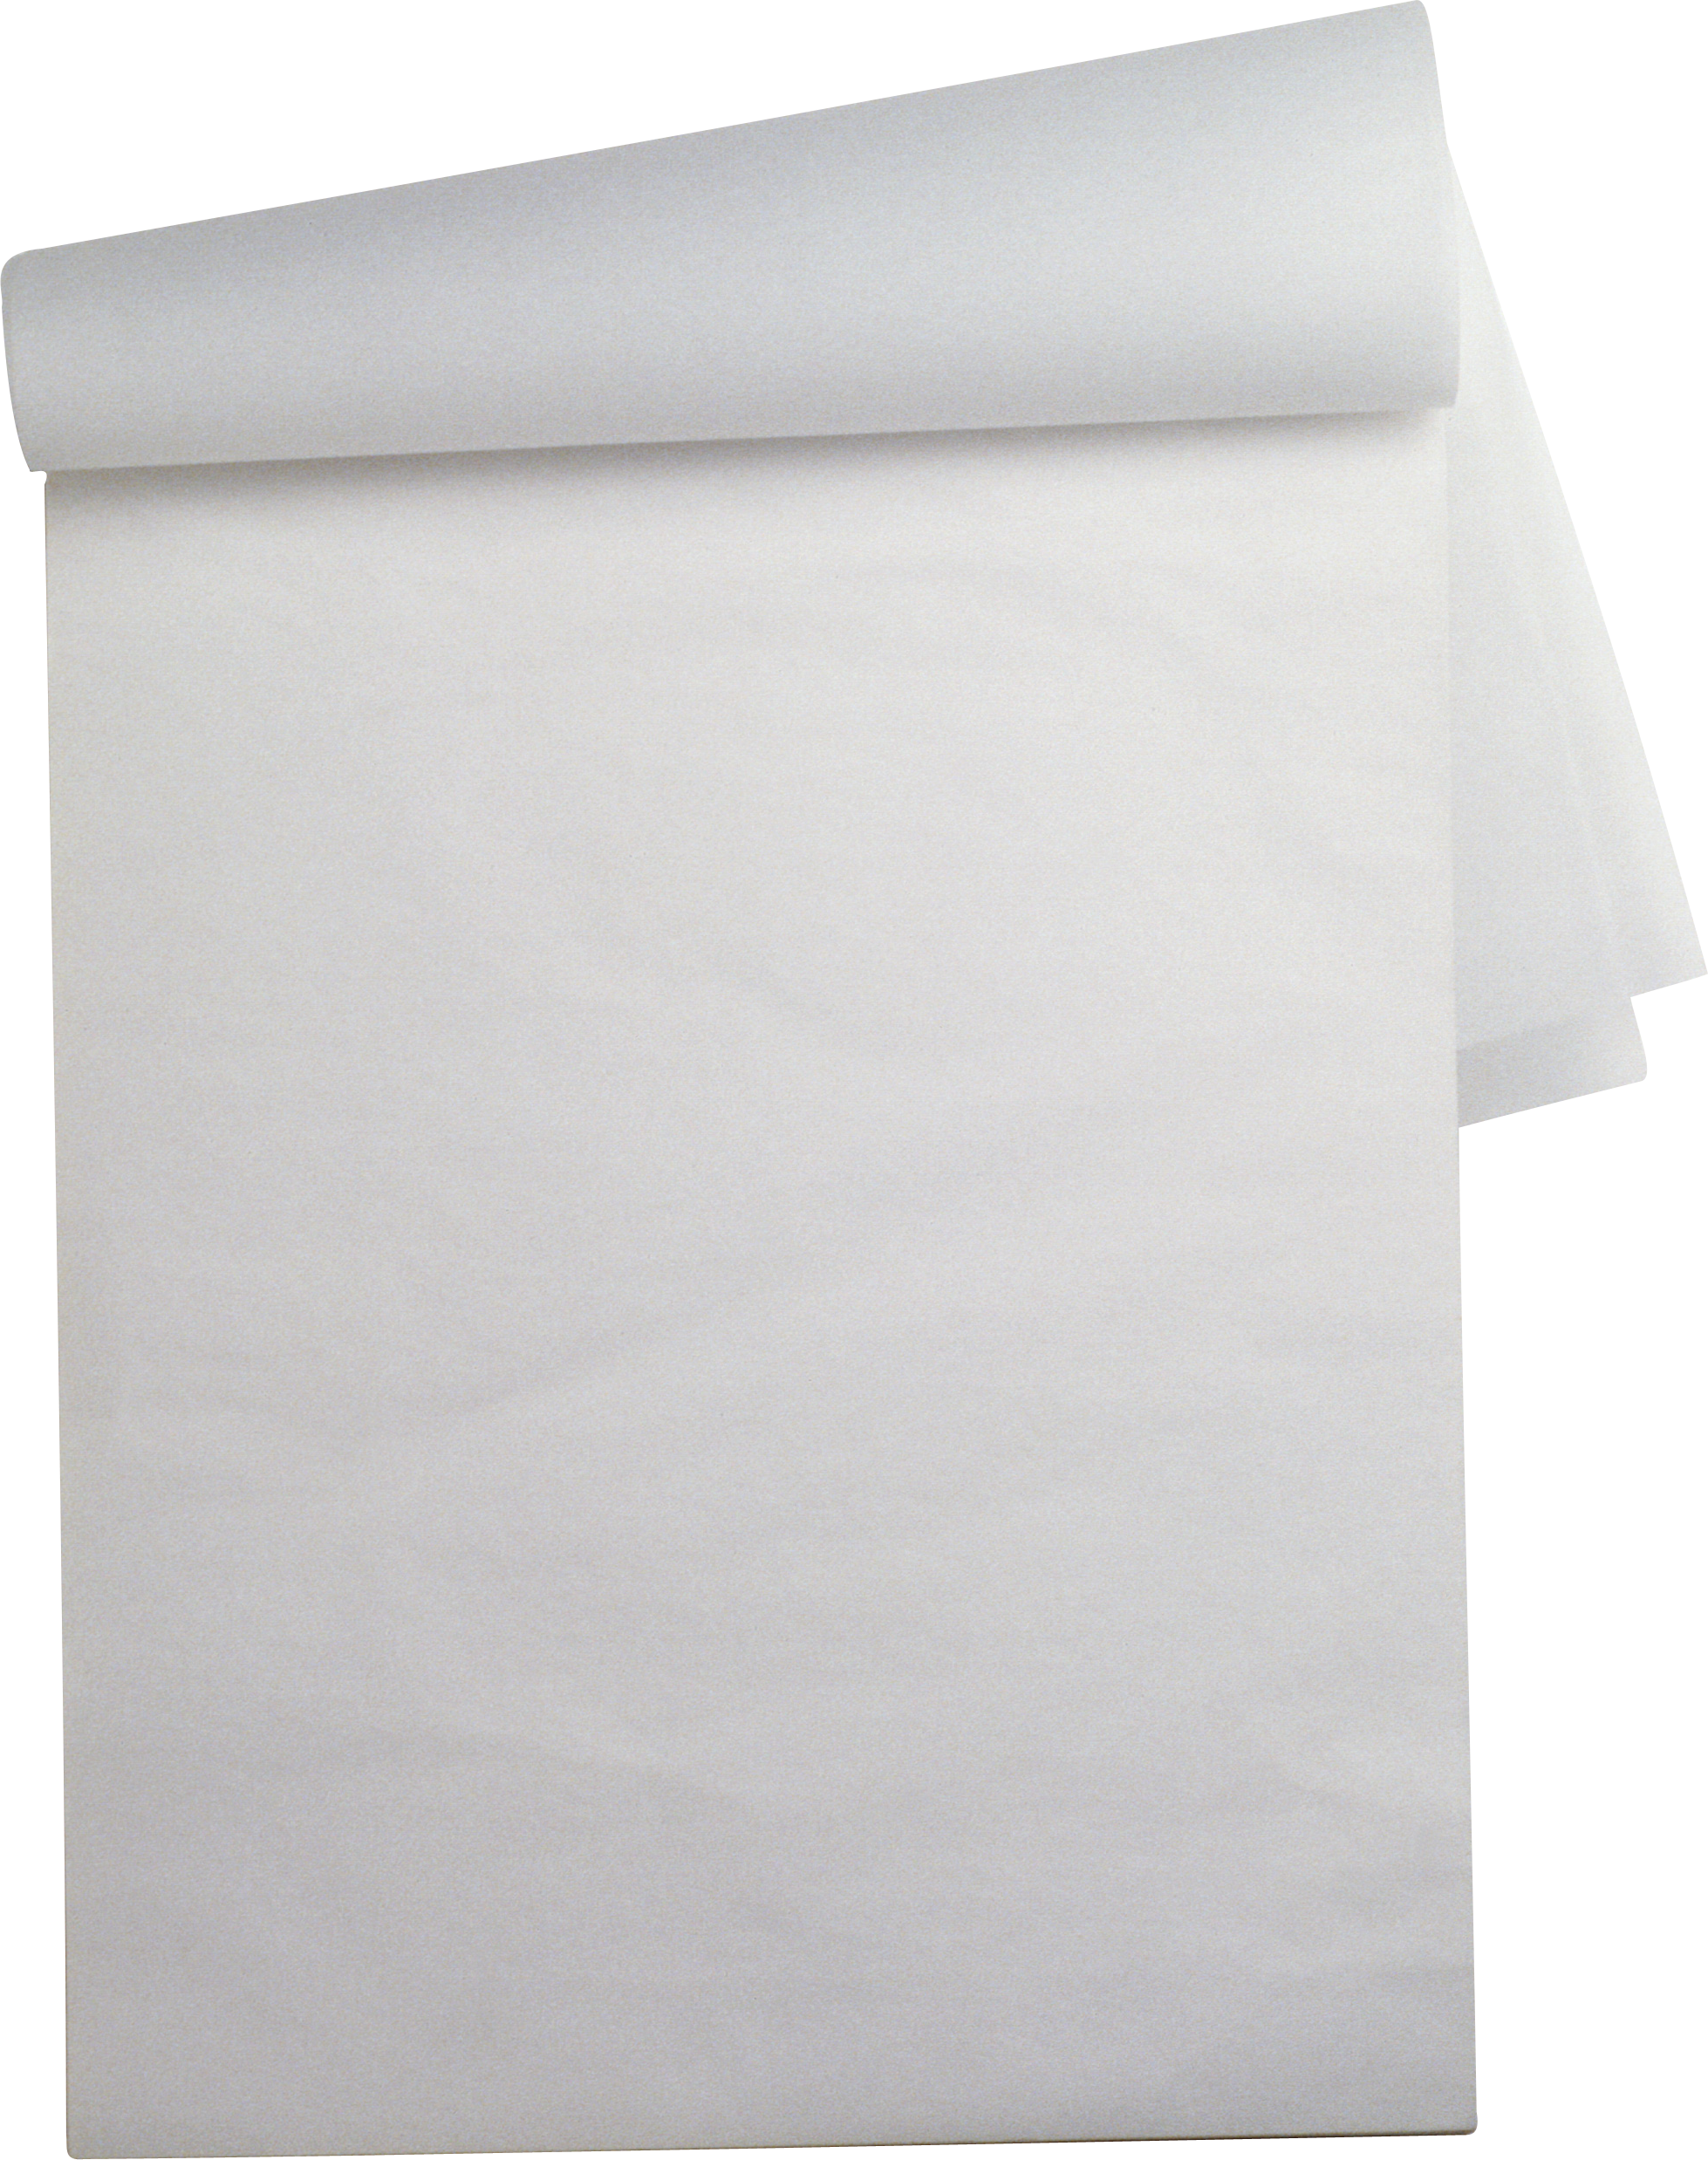 Paper sheet PNG images free download, paper PNG